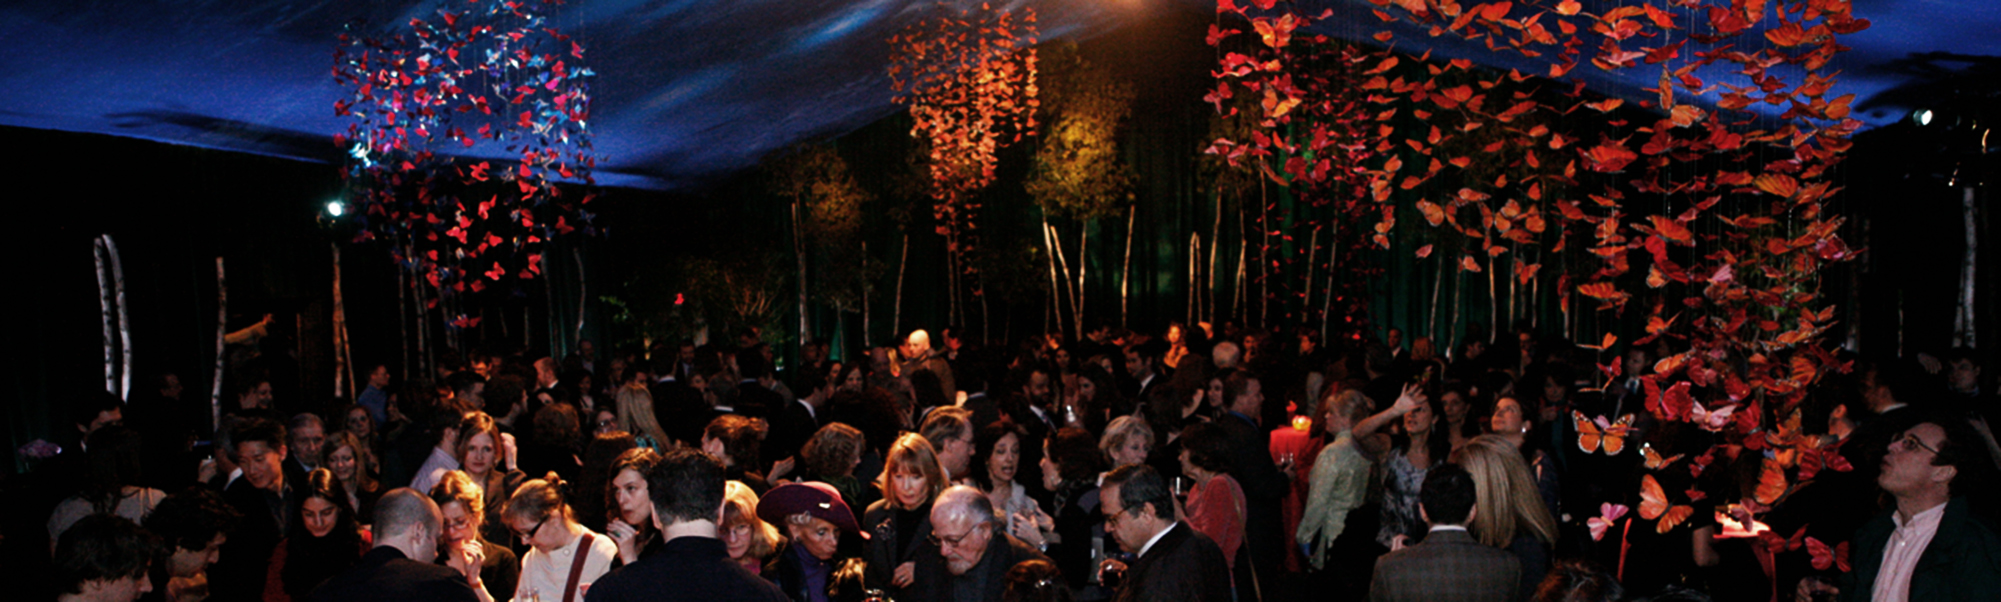 a darkened event space with dramatically lit faux butterflies draped in clumps from the ceiling, and a room full of adults in formal attire, gathering near a large bar.